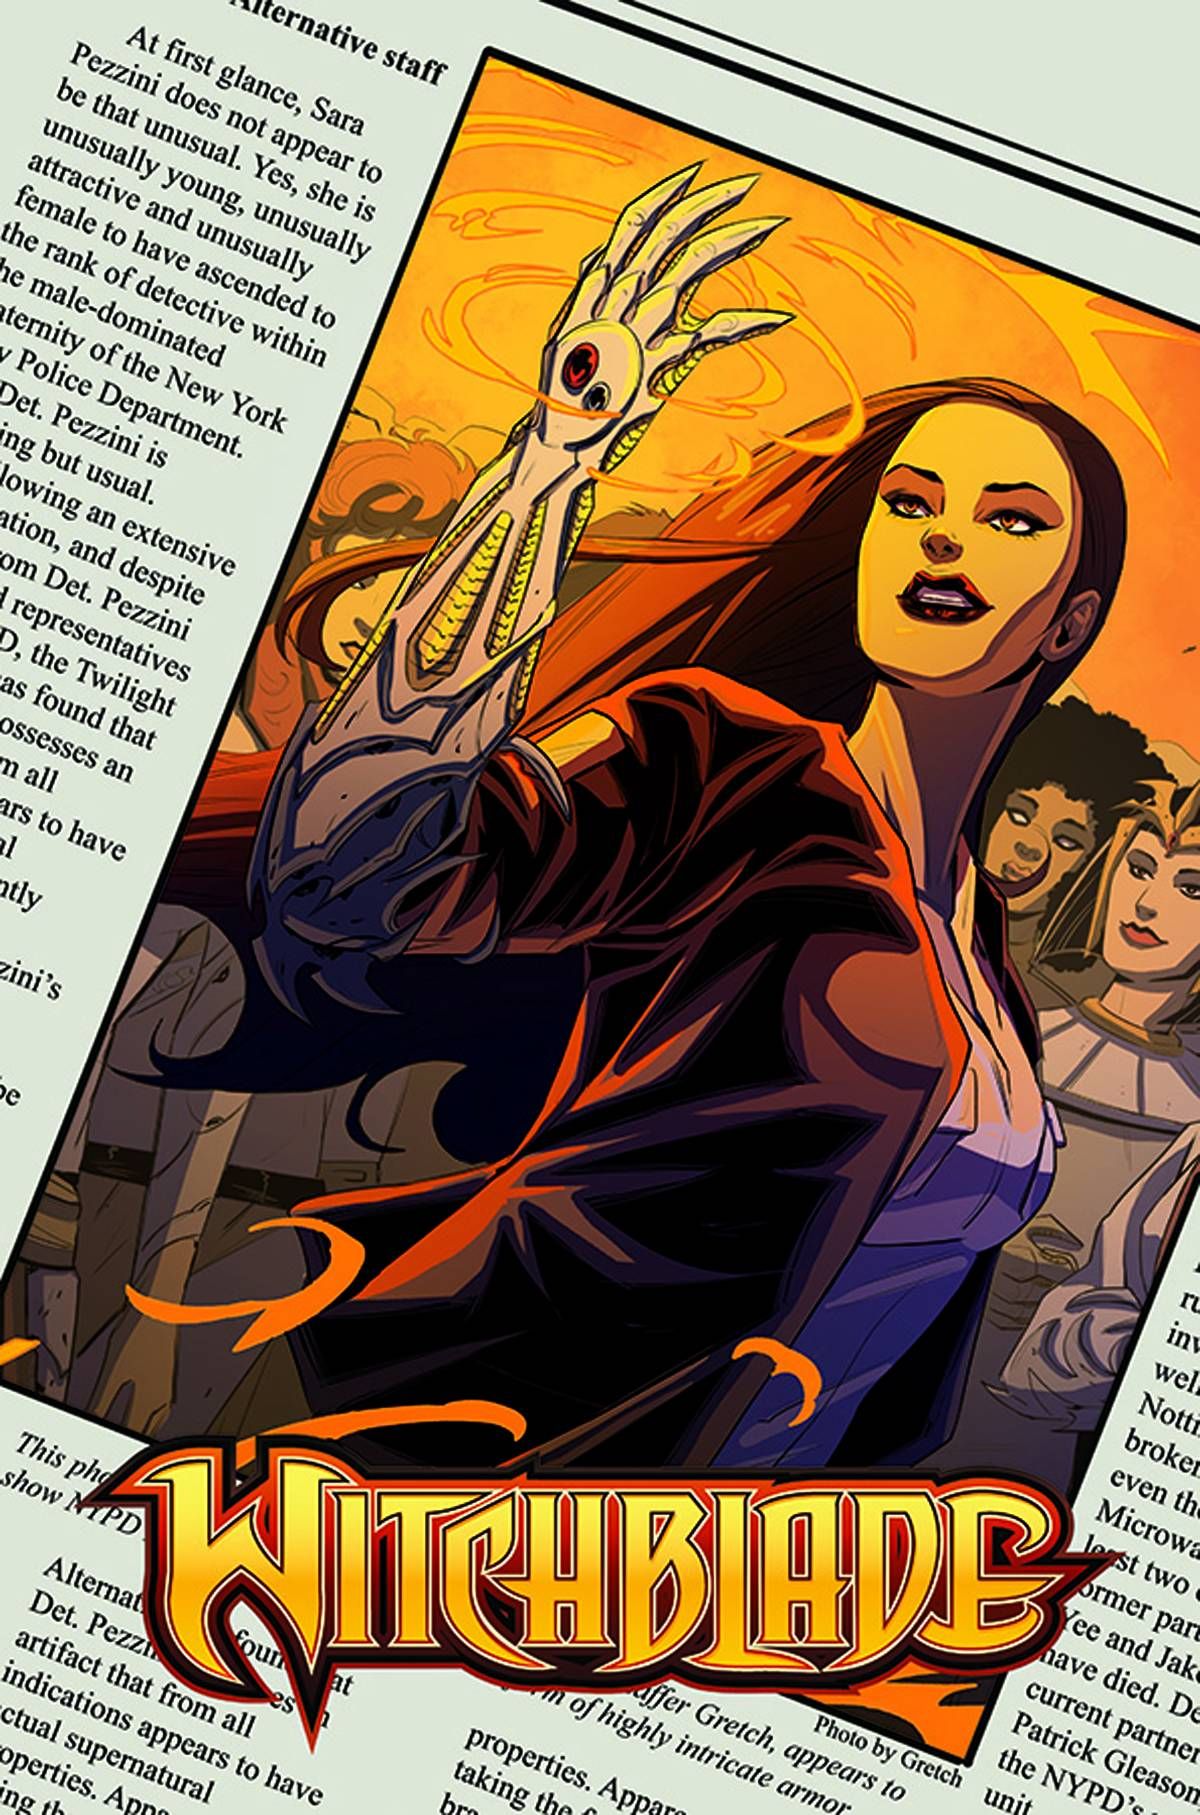 Witchblade Case Files #1 Comic